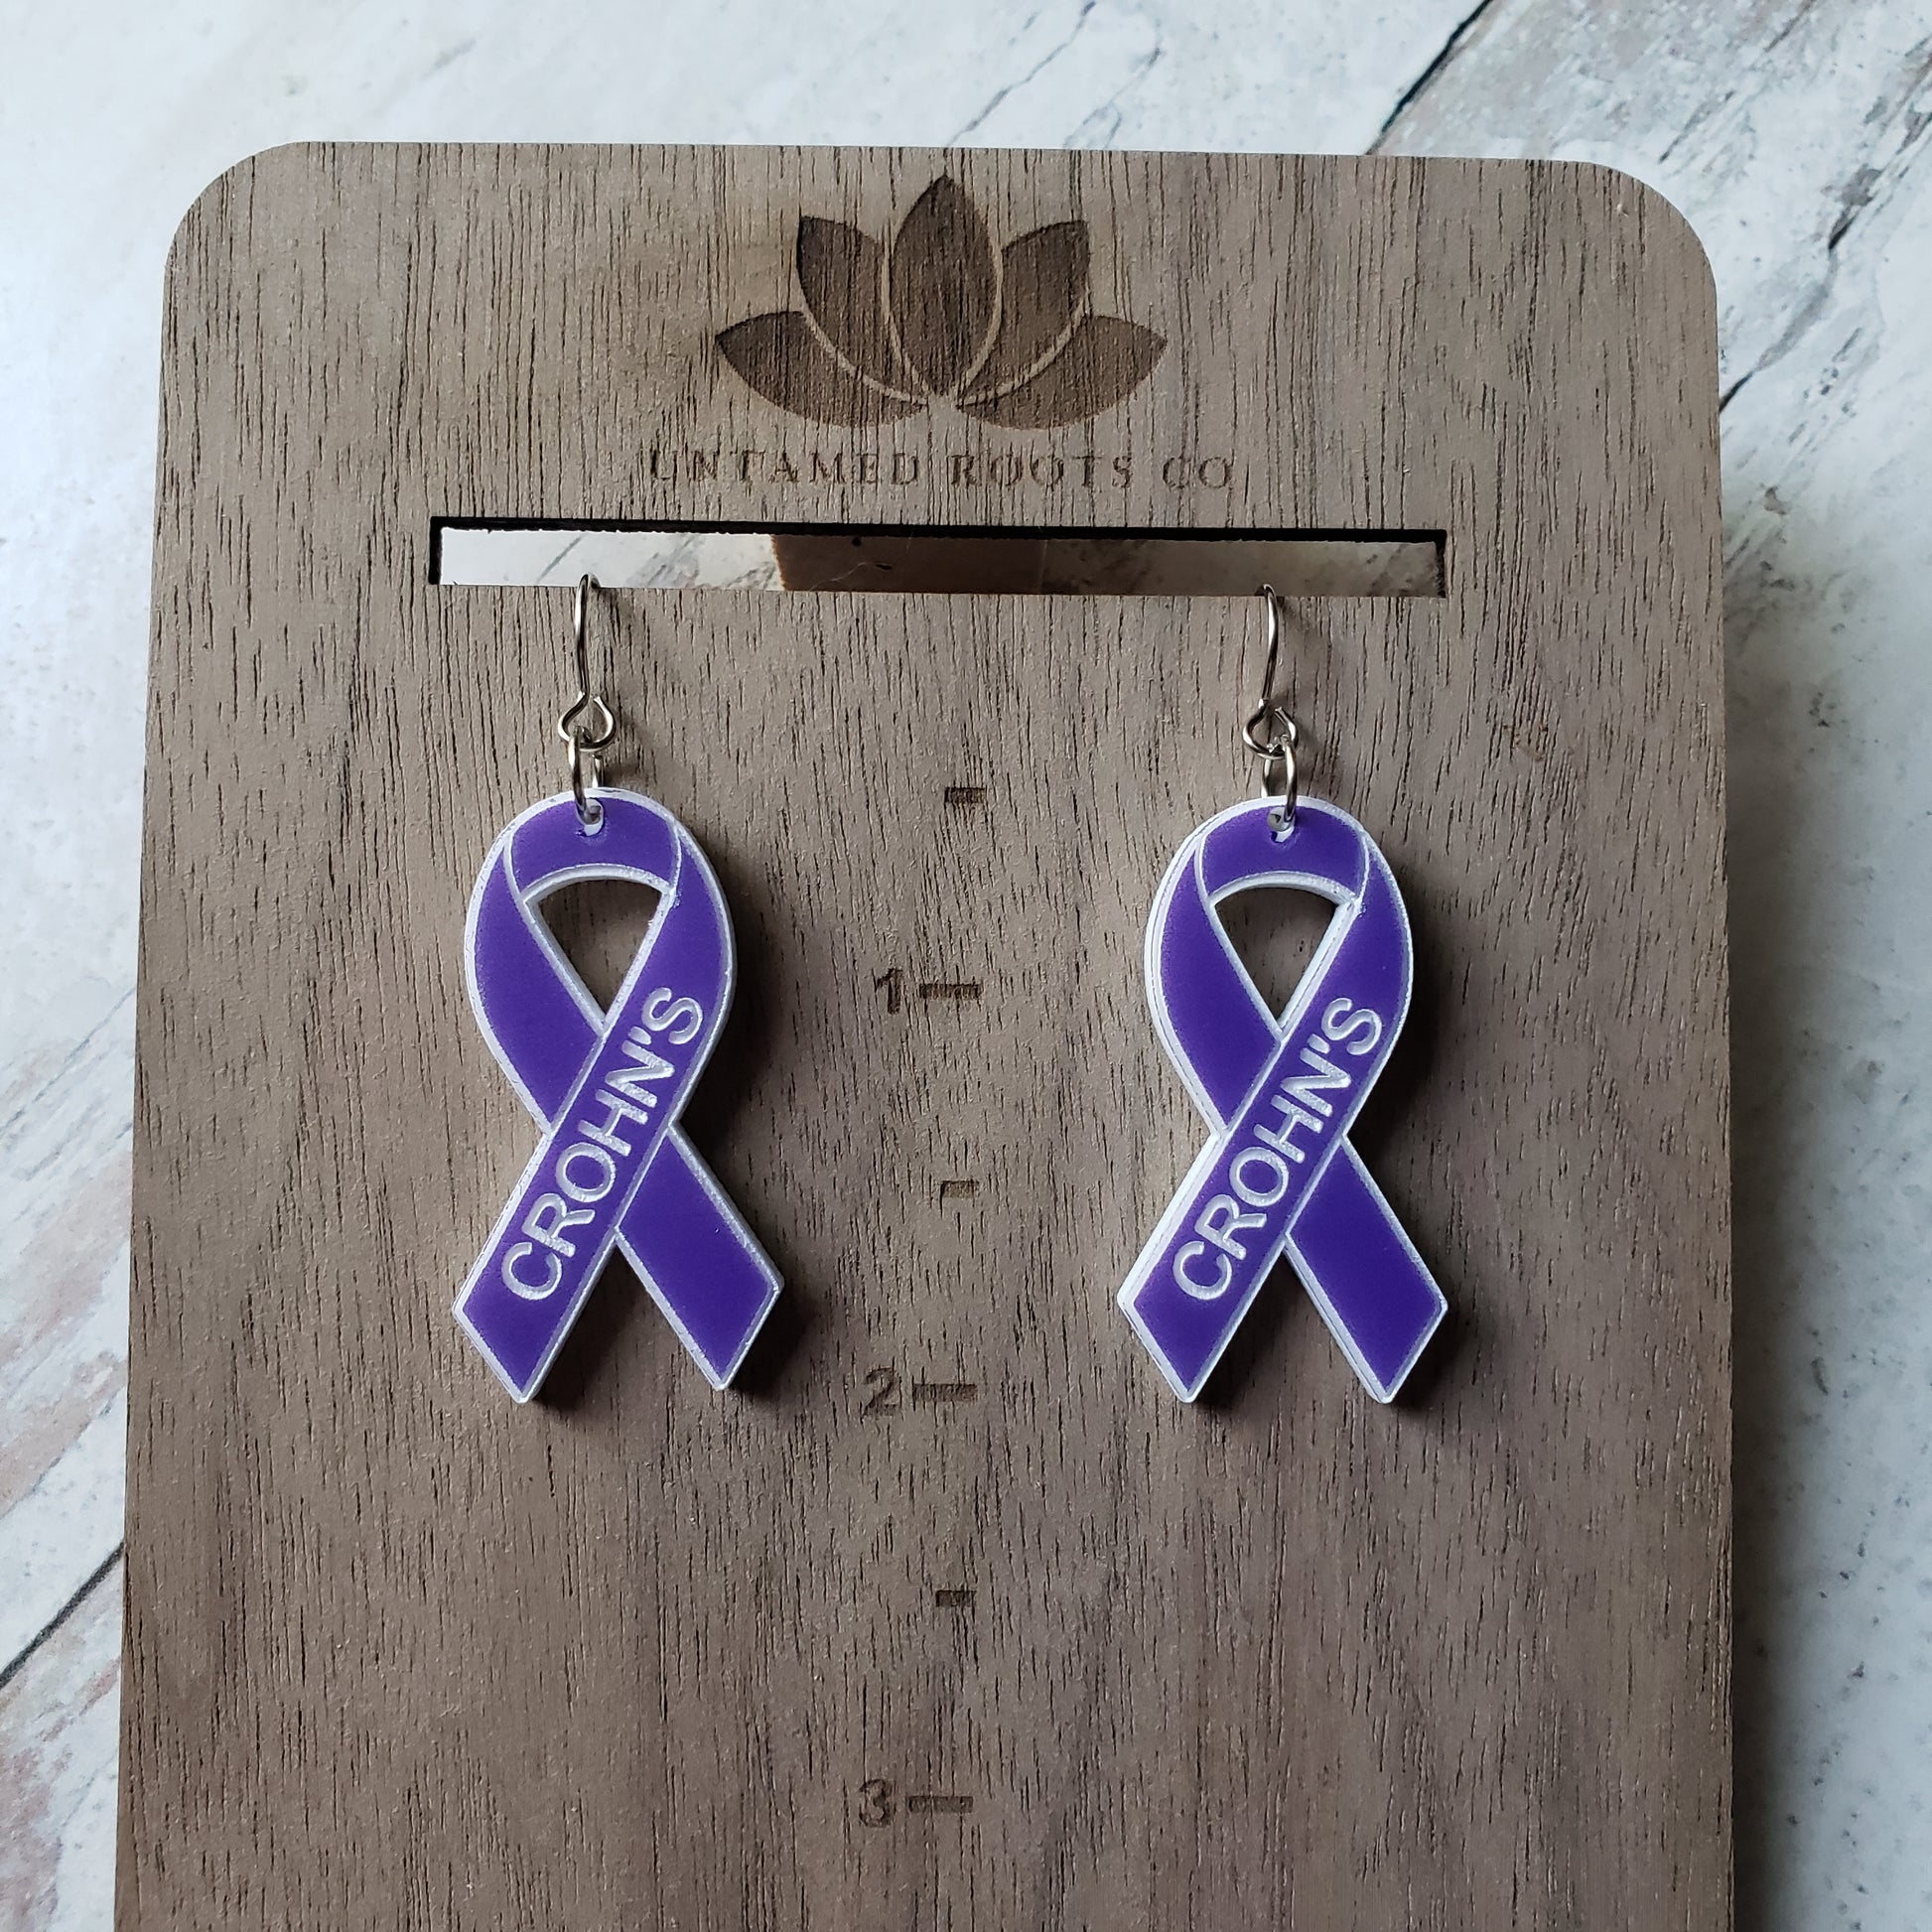 Pair of purple awareness ribbons, with engraving. Stainless steel earring wires. Size reference.